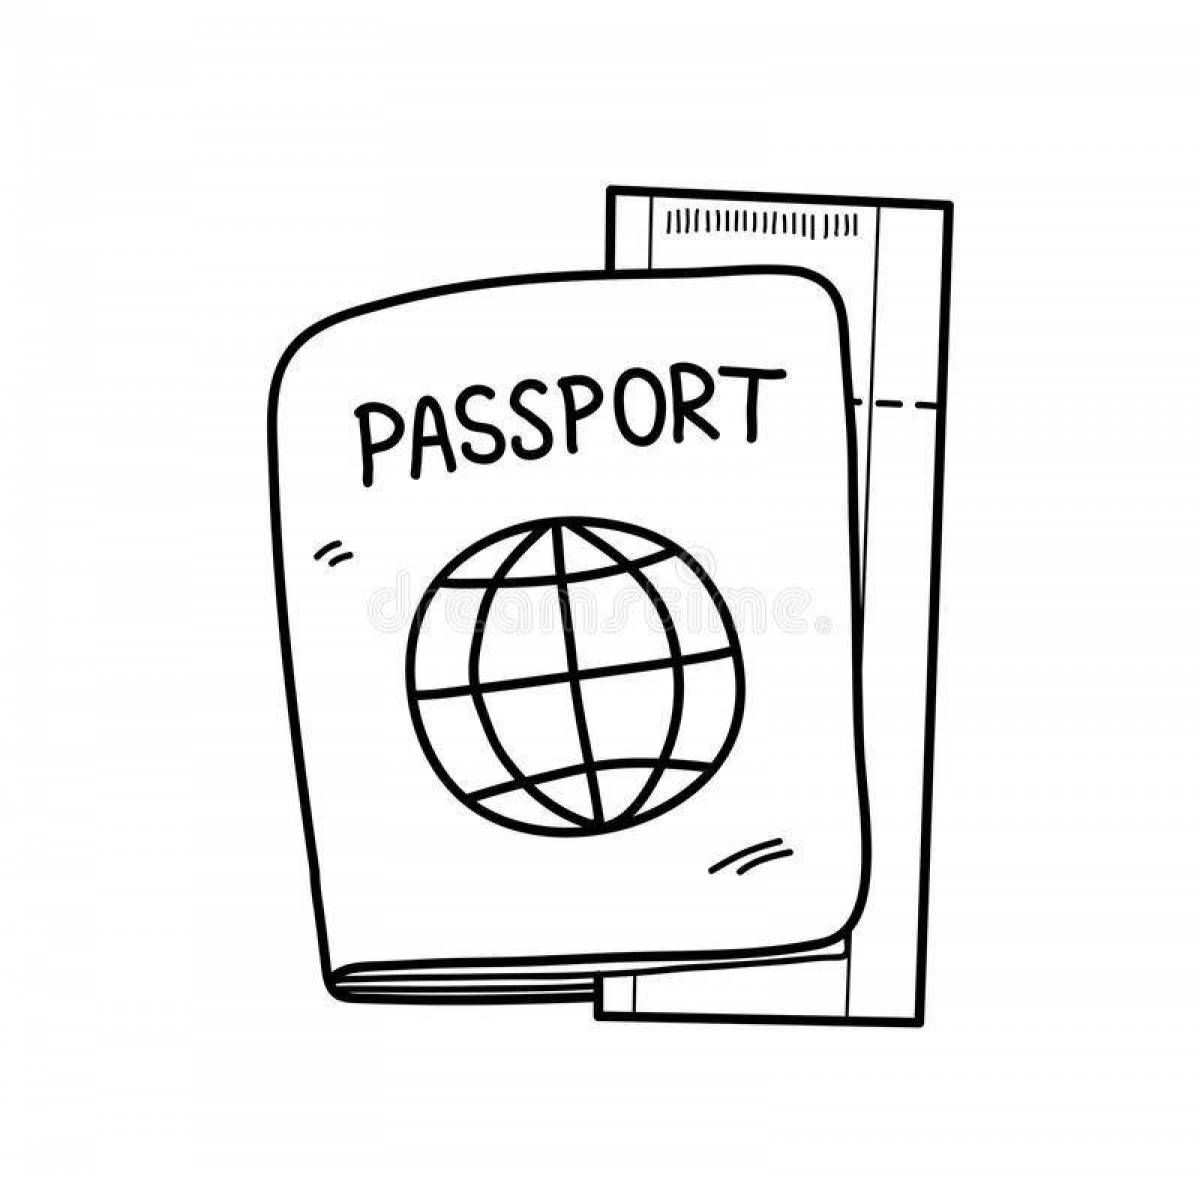 Bright passport coloring page